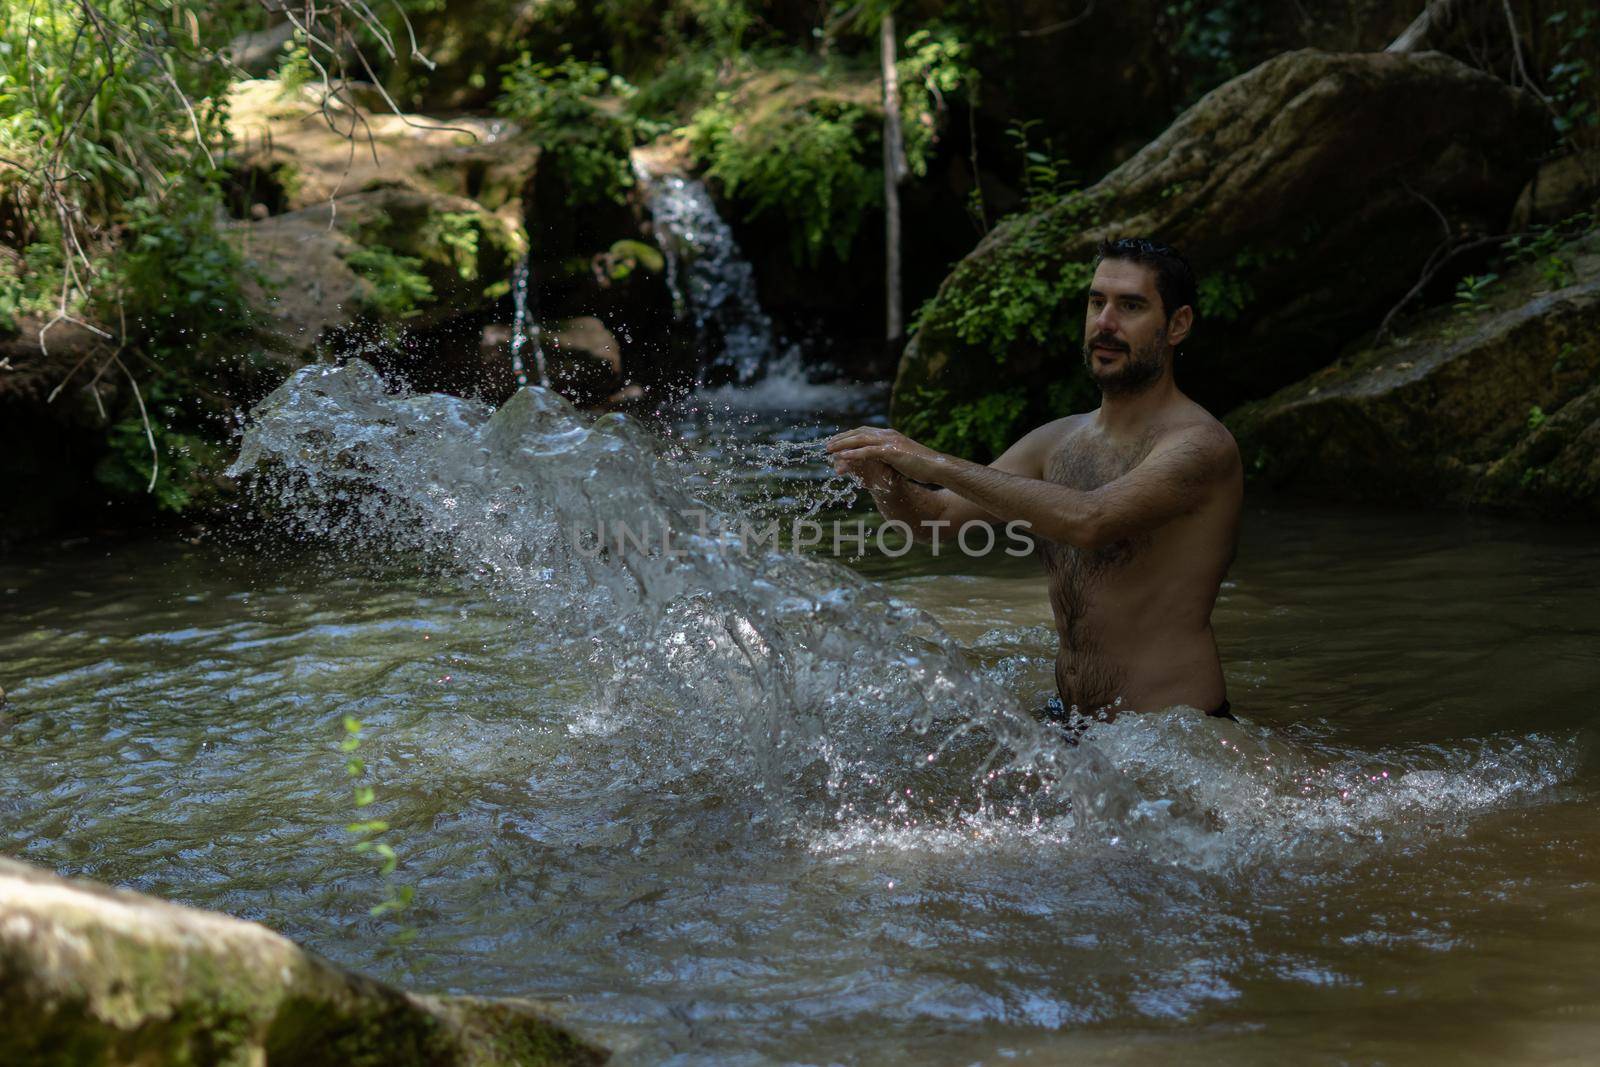 man in the river splashing water with his hands by joseantona